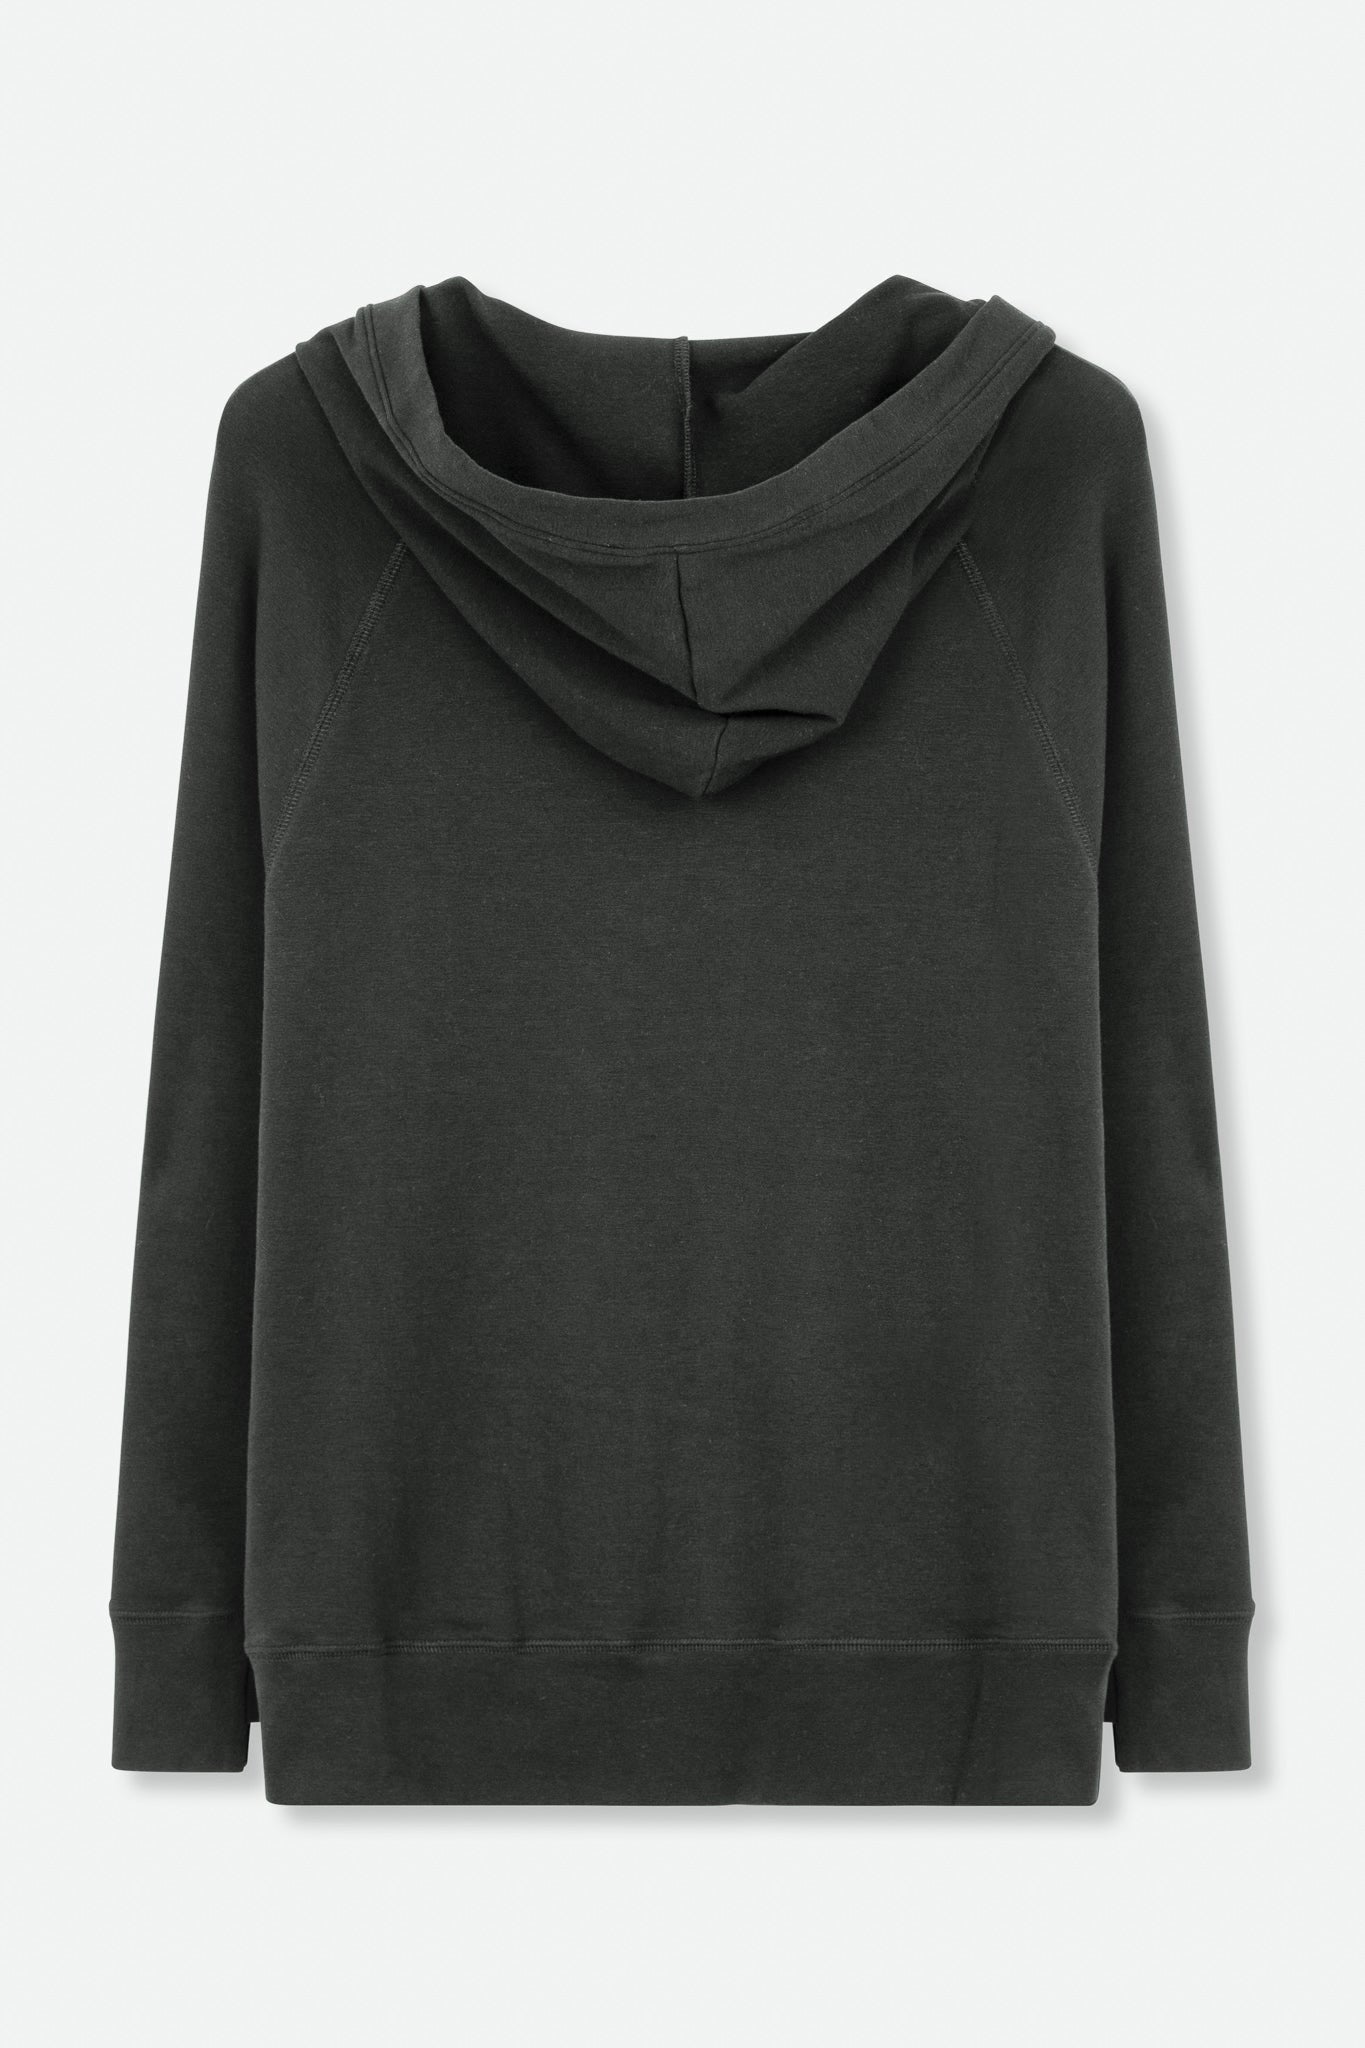 ADDY HOODY IN PIMA COTTON STRETCH CINDER - Jarbo